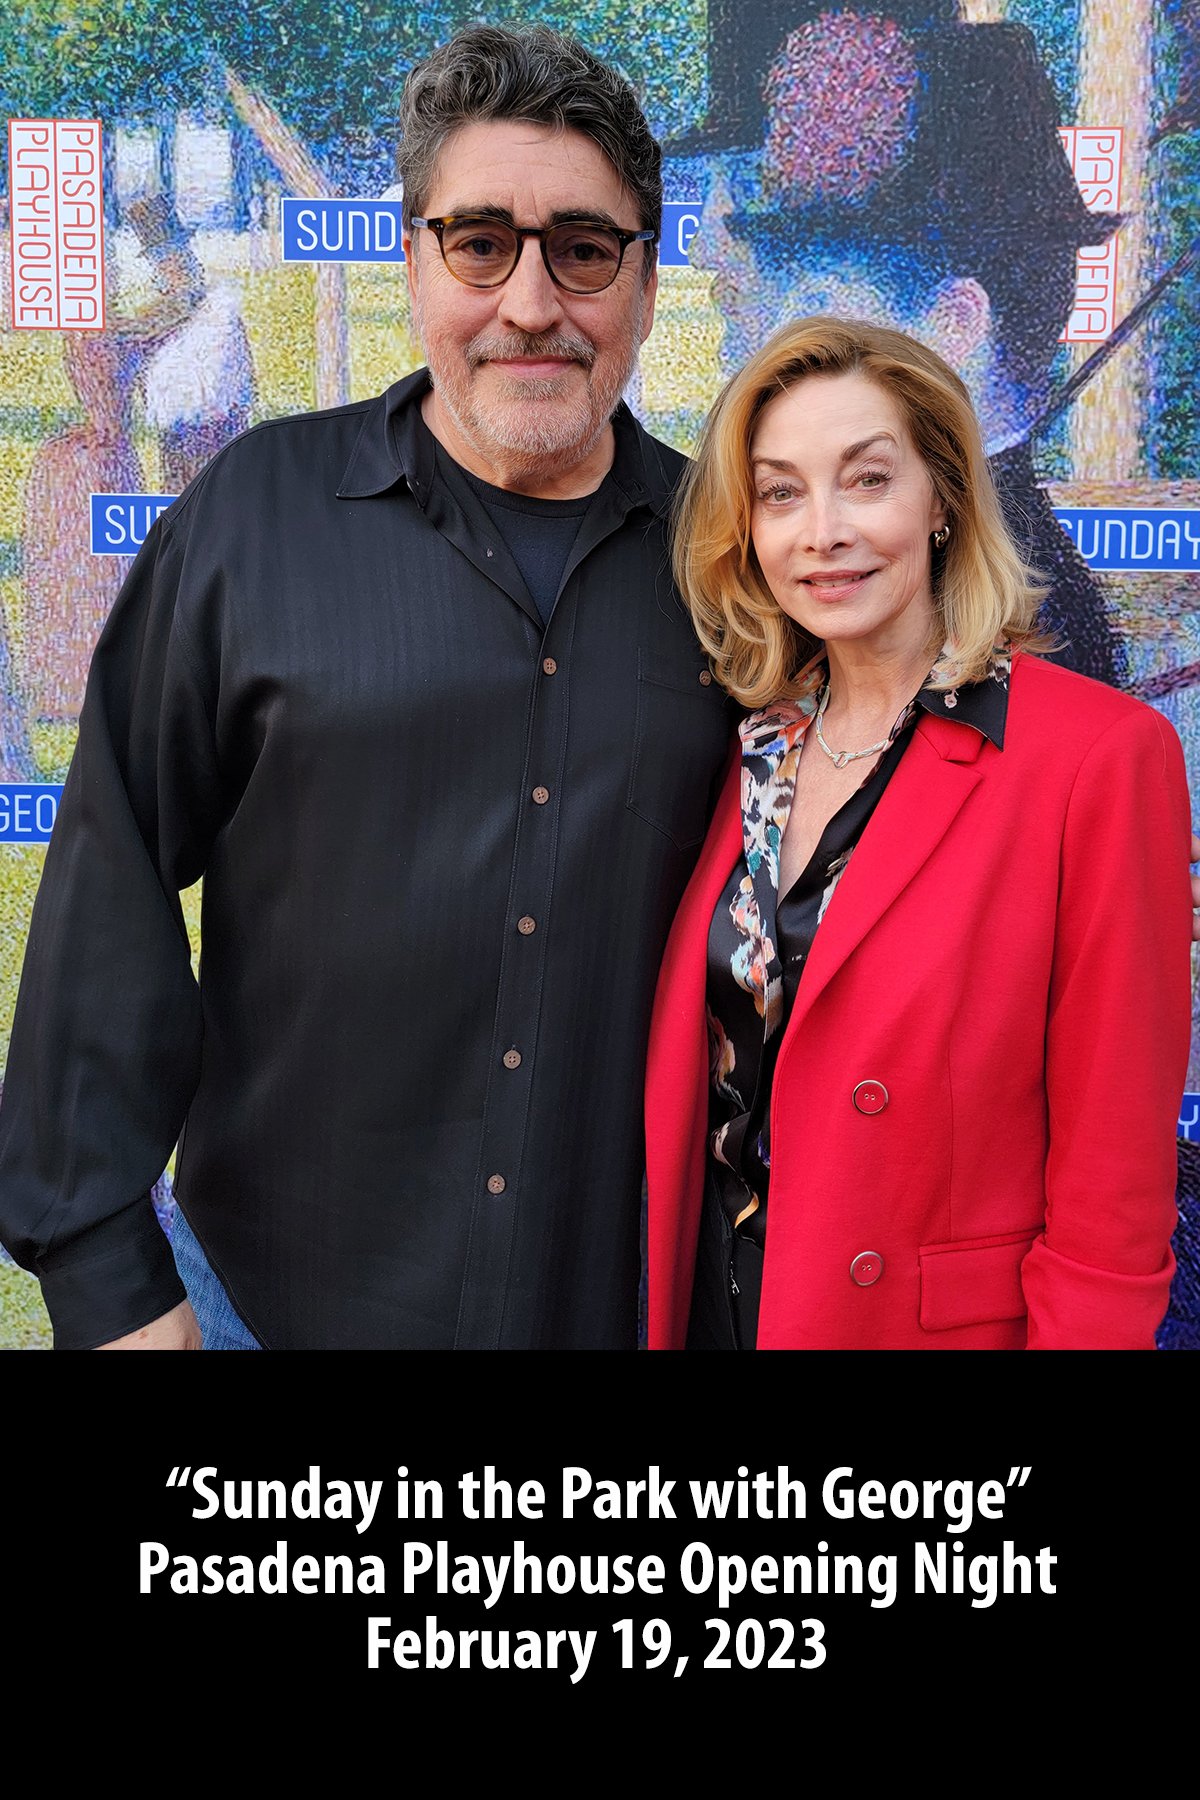 "Sunday in the Park with George" Pasadena Playhouse Opening Night